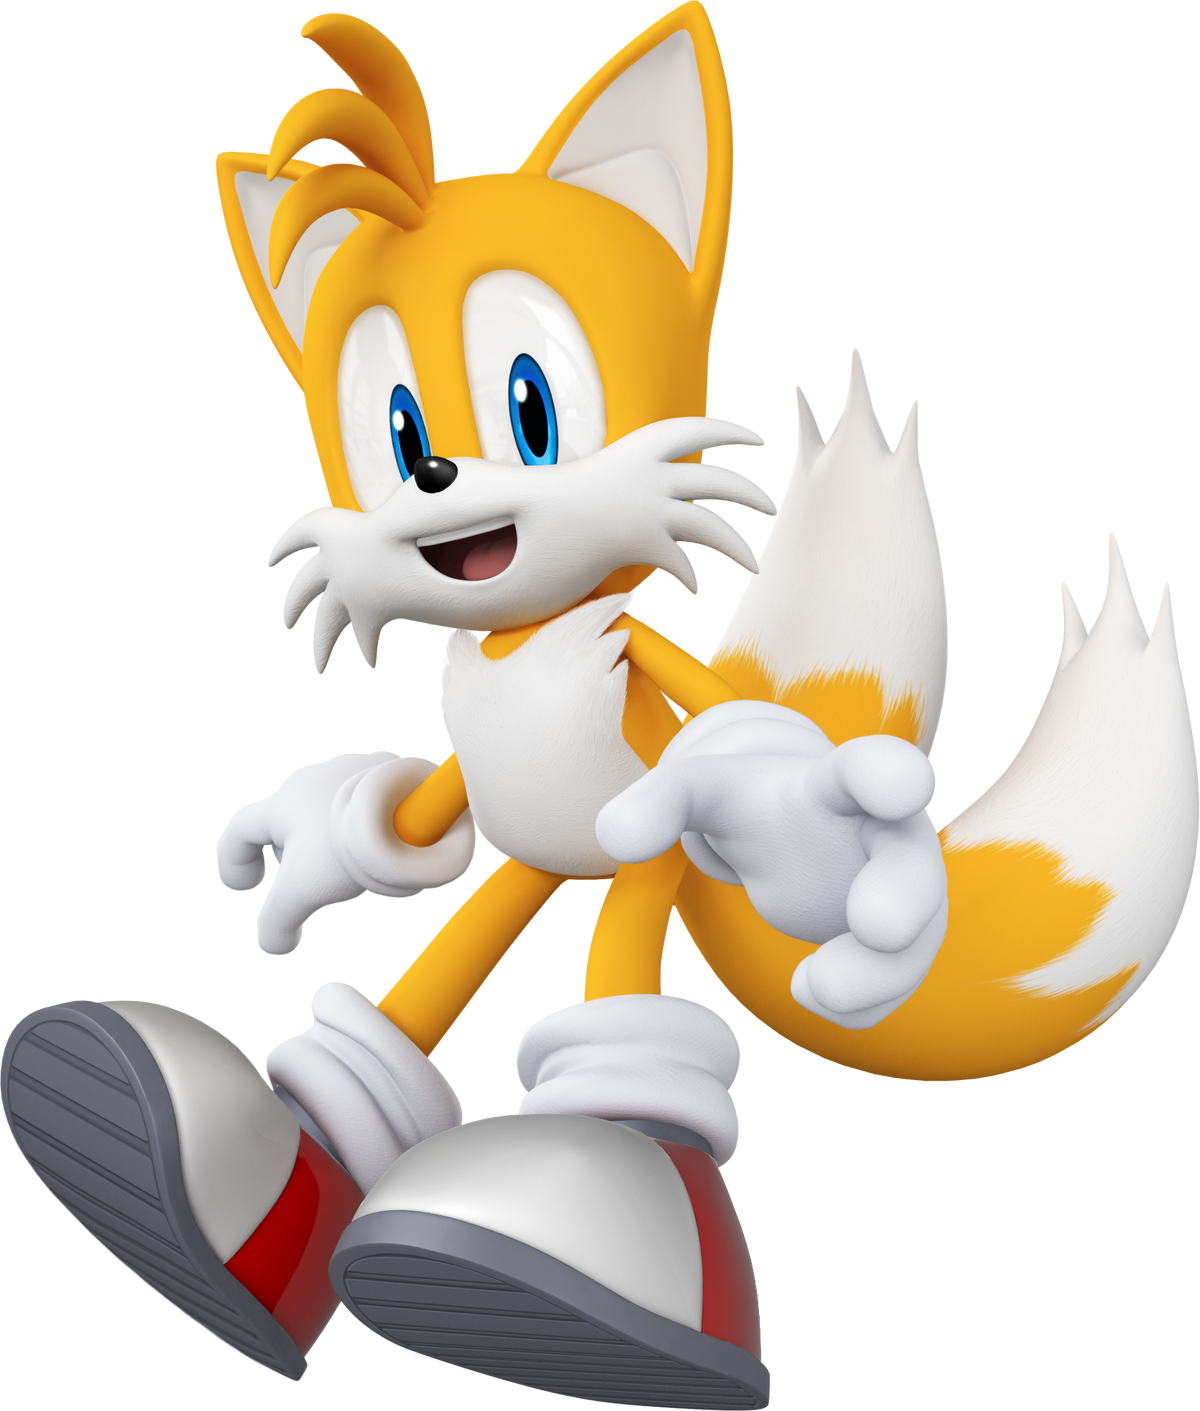 Tails Sonic Boom: Rise of Lyric Sonic the Hedgehog Doctor Eggman, sonic the  hedgehog, sonic The Hedgehog, computer Wallpaper, tail png